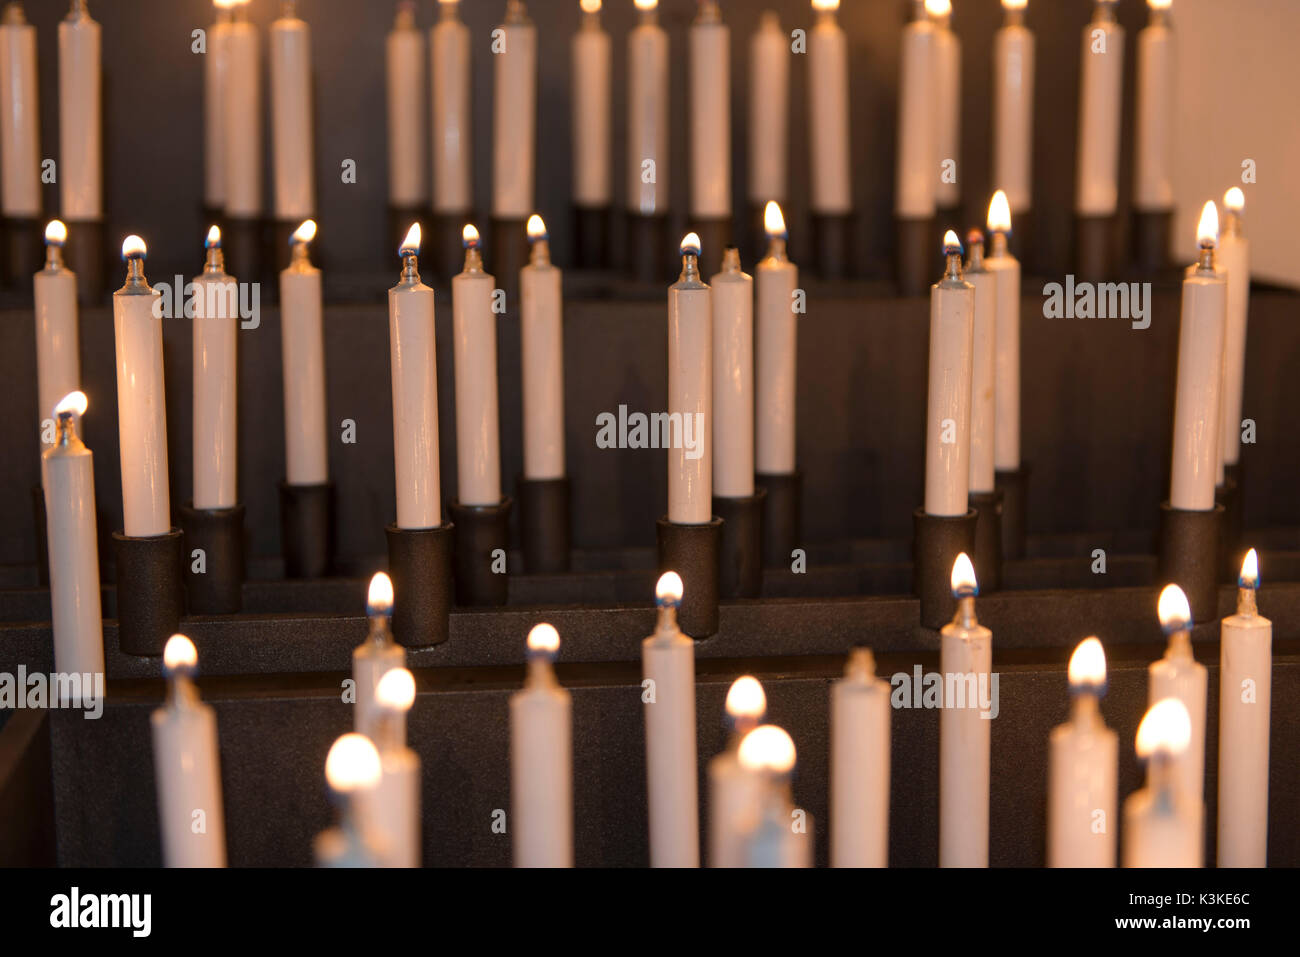 white liquid wax offering candles Stock Photo